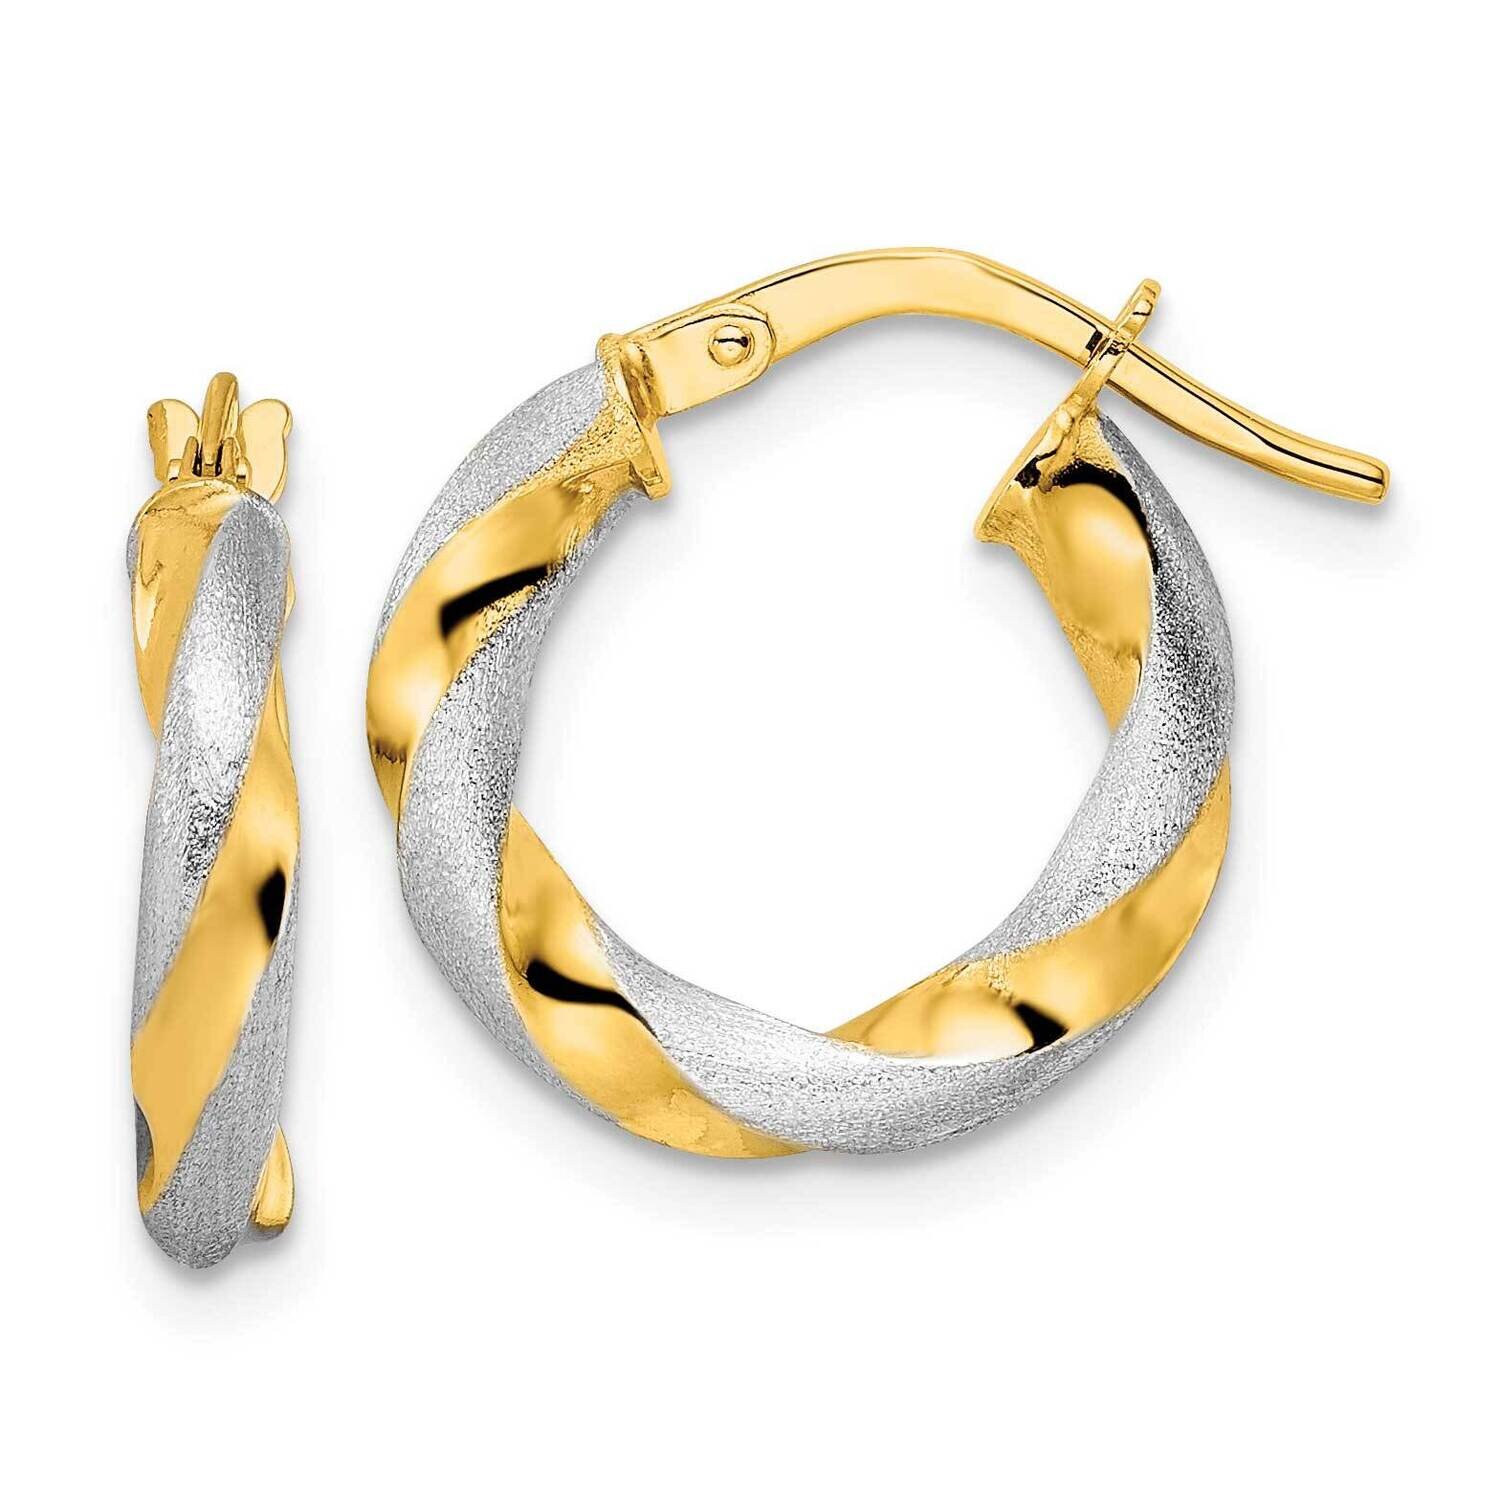 Brushed and Polished Twisted Hoop Earrings 14k Gold with White Rhodium TF2129